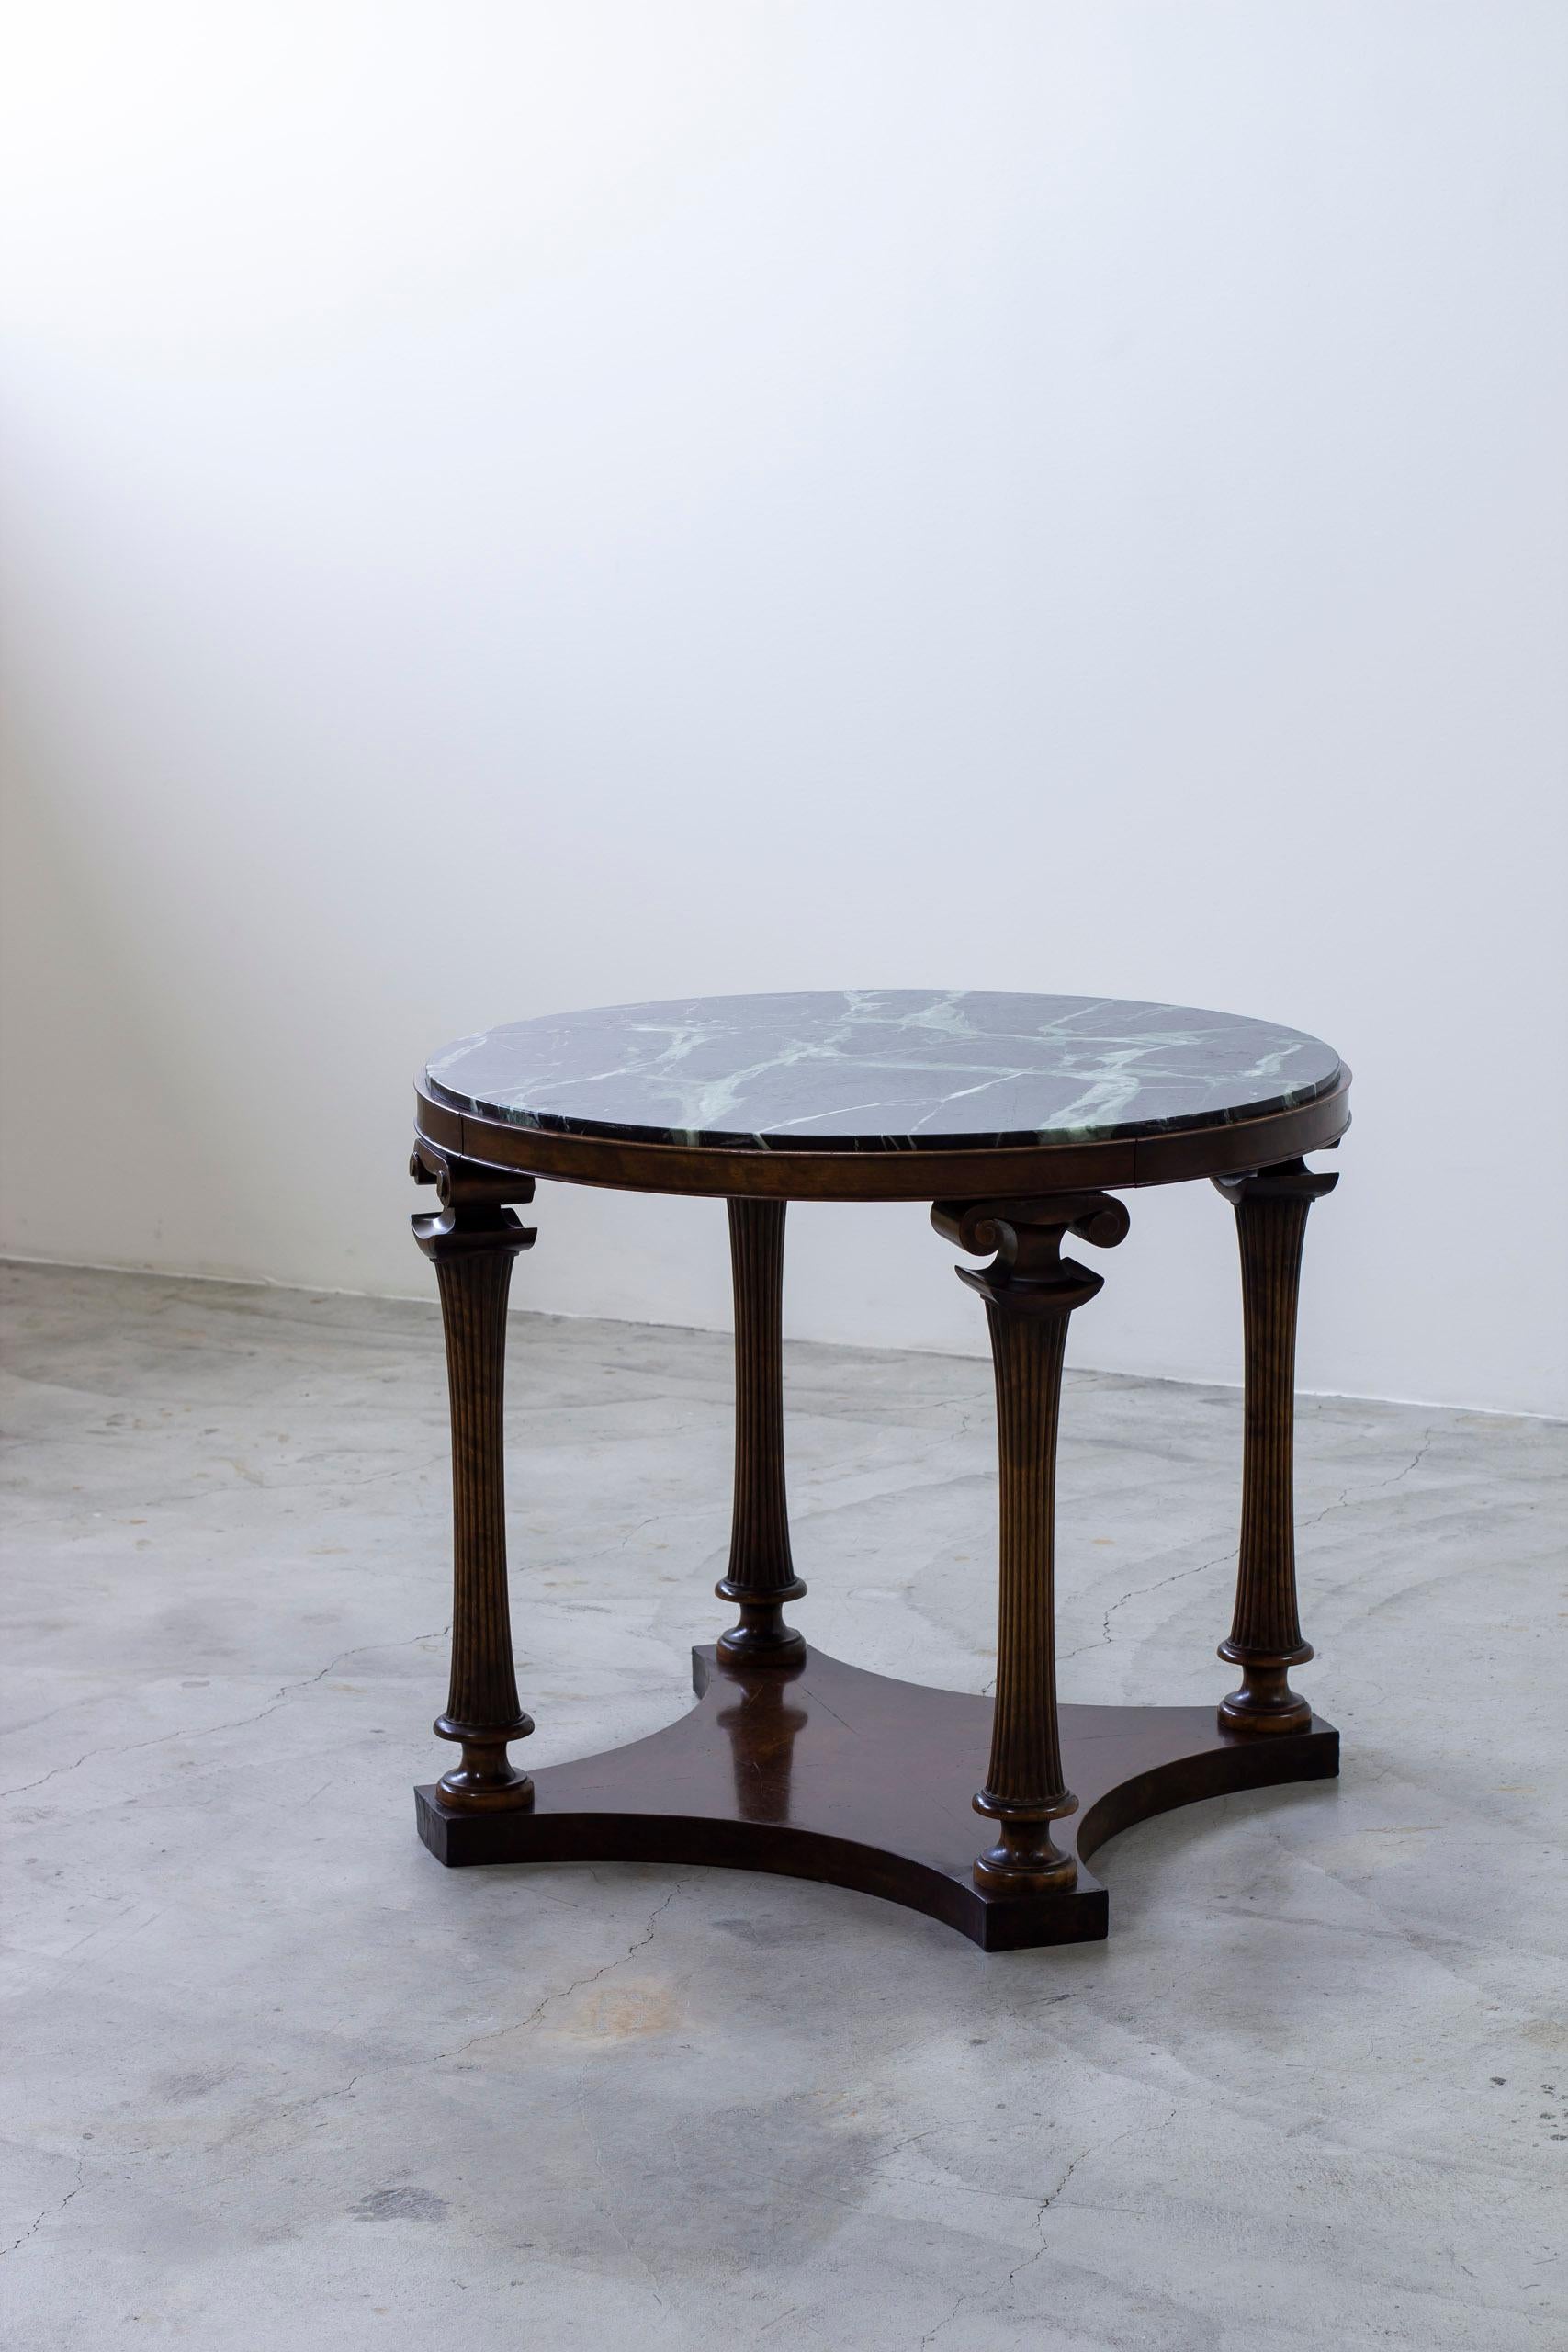 Neoclassical or as it was described in Sweden, Swedish grace entrance table made by Carl Johansson möblerings affär in Stockholm ca 1920s. The style is closely related to Art Deco furniture. The style of the table is reminiscent of Axel Einar Hjorts